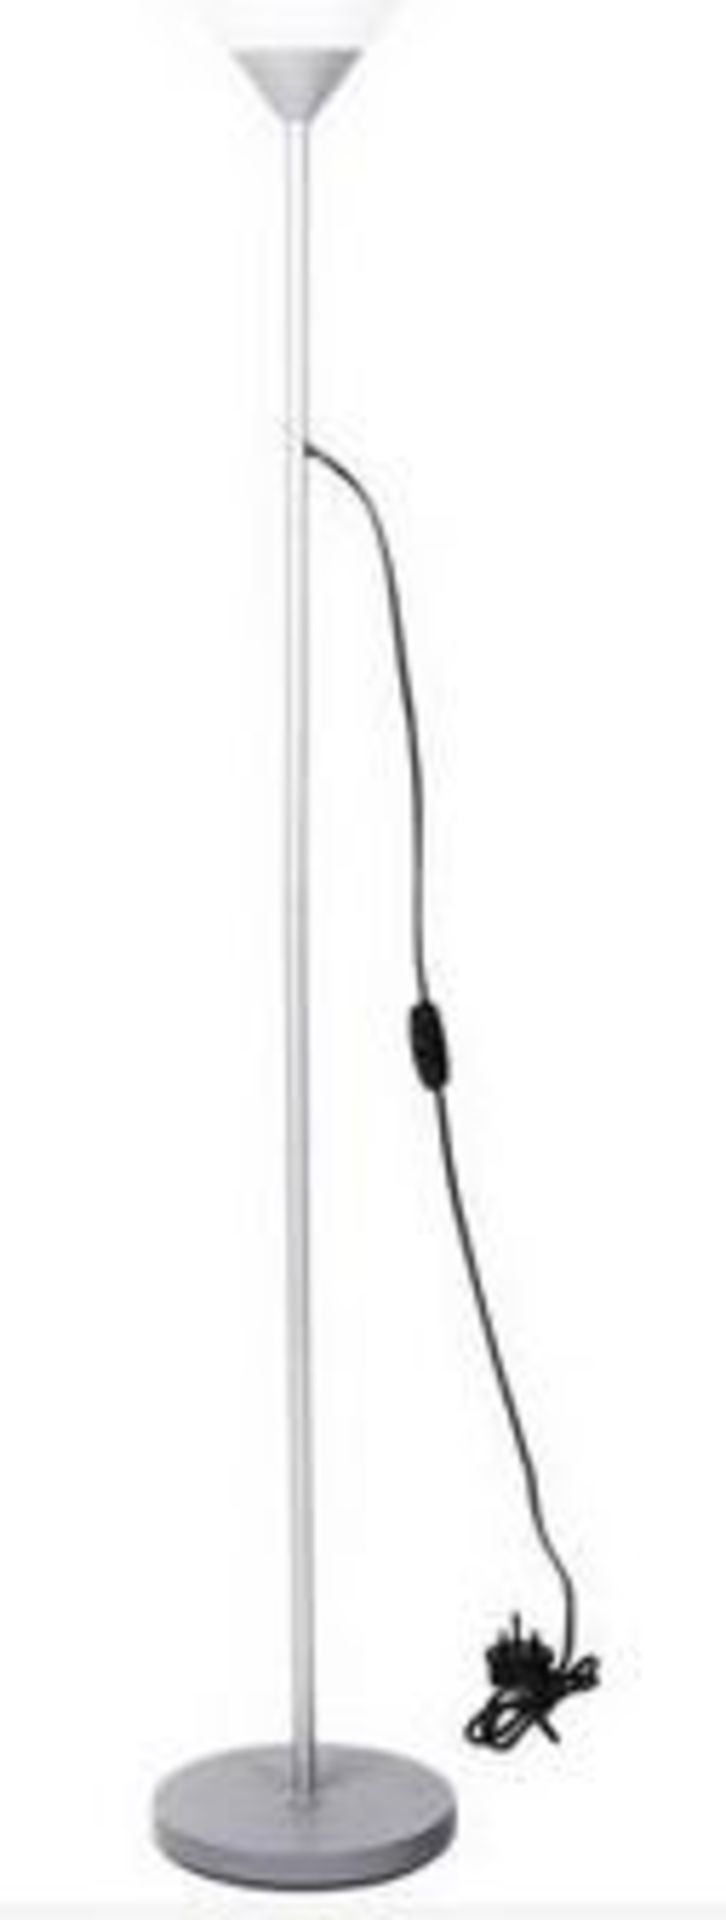 1 BOXED HOME UPLIGHTER FLOOR LAMP - SILVER (PUBLIC VIEWING AVAILABLE) - Image 2 of 2